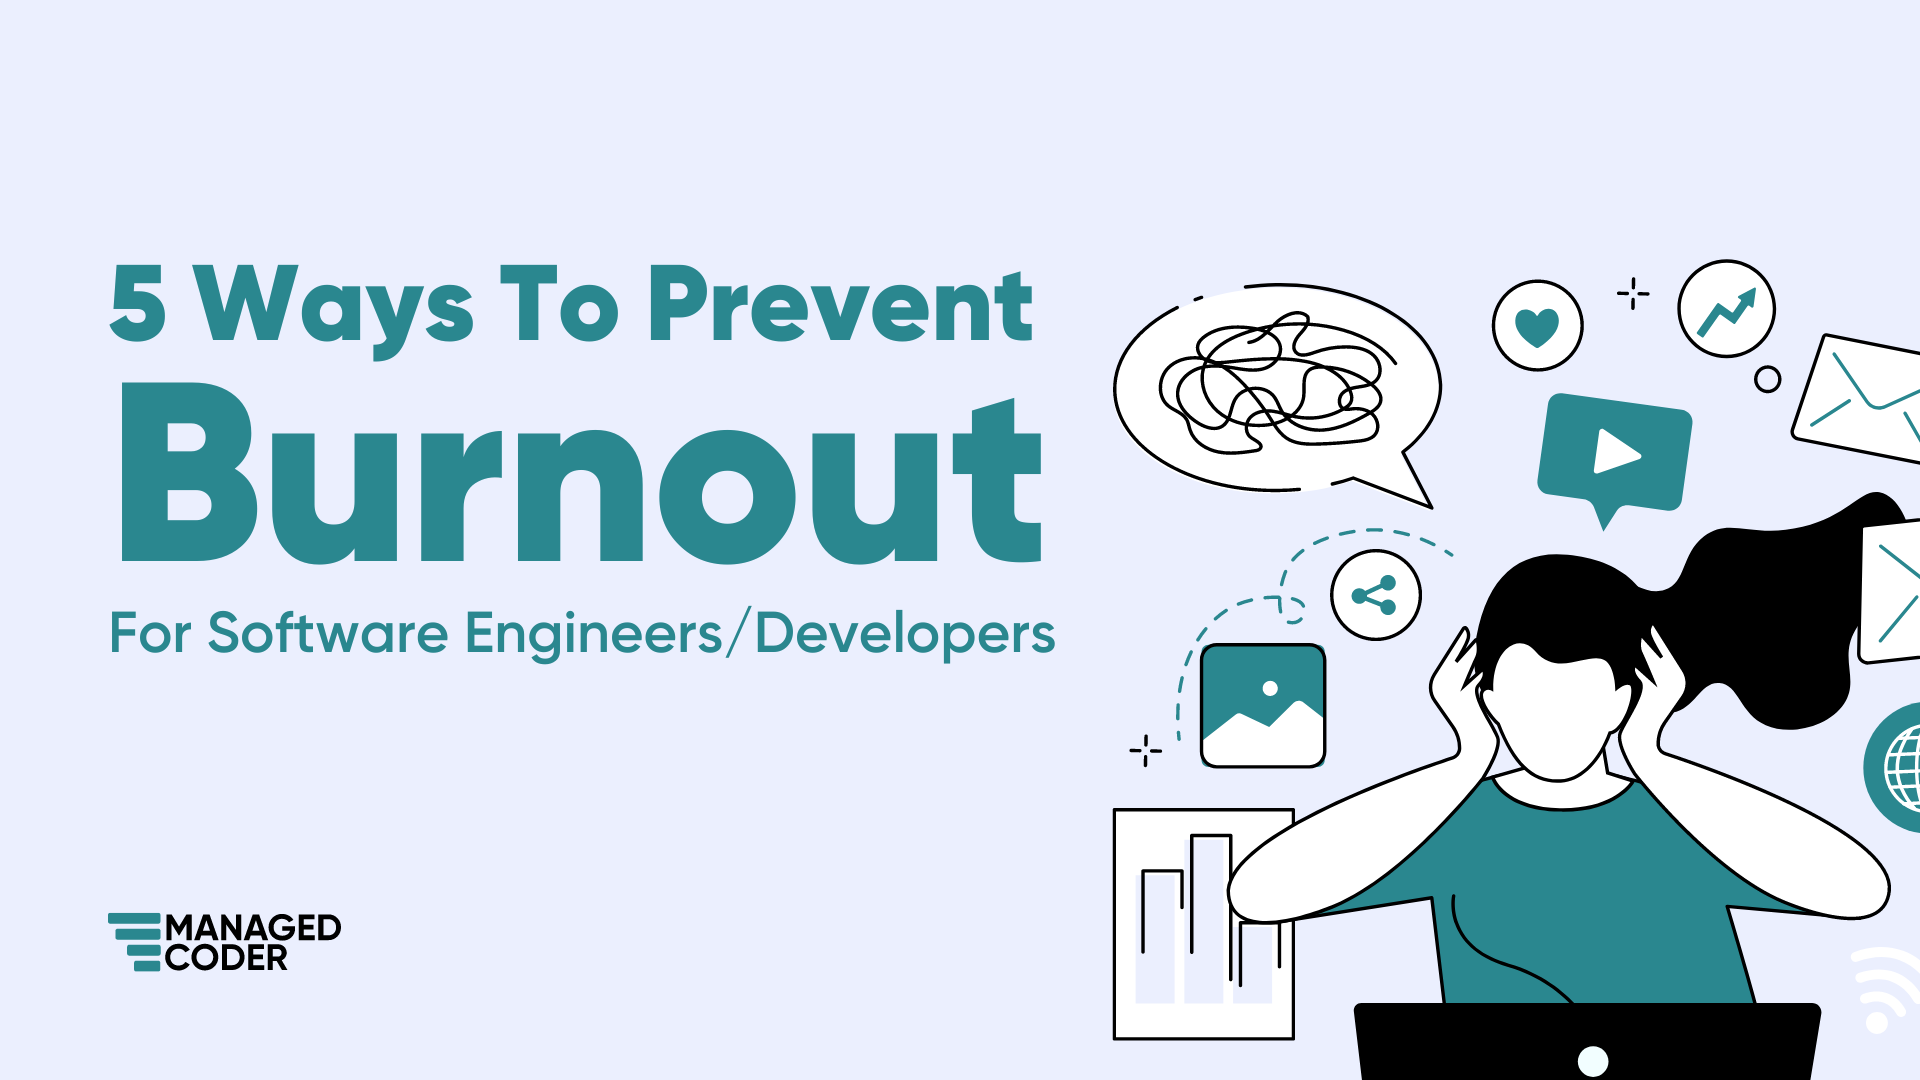 5 Ways to help prevent burnout for software engingeers-developers